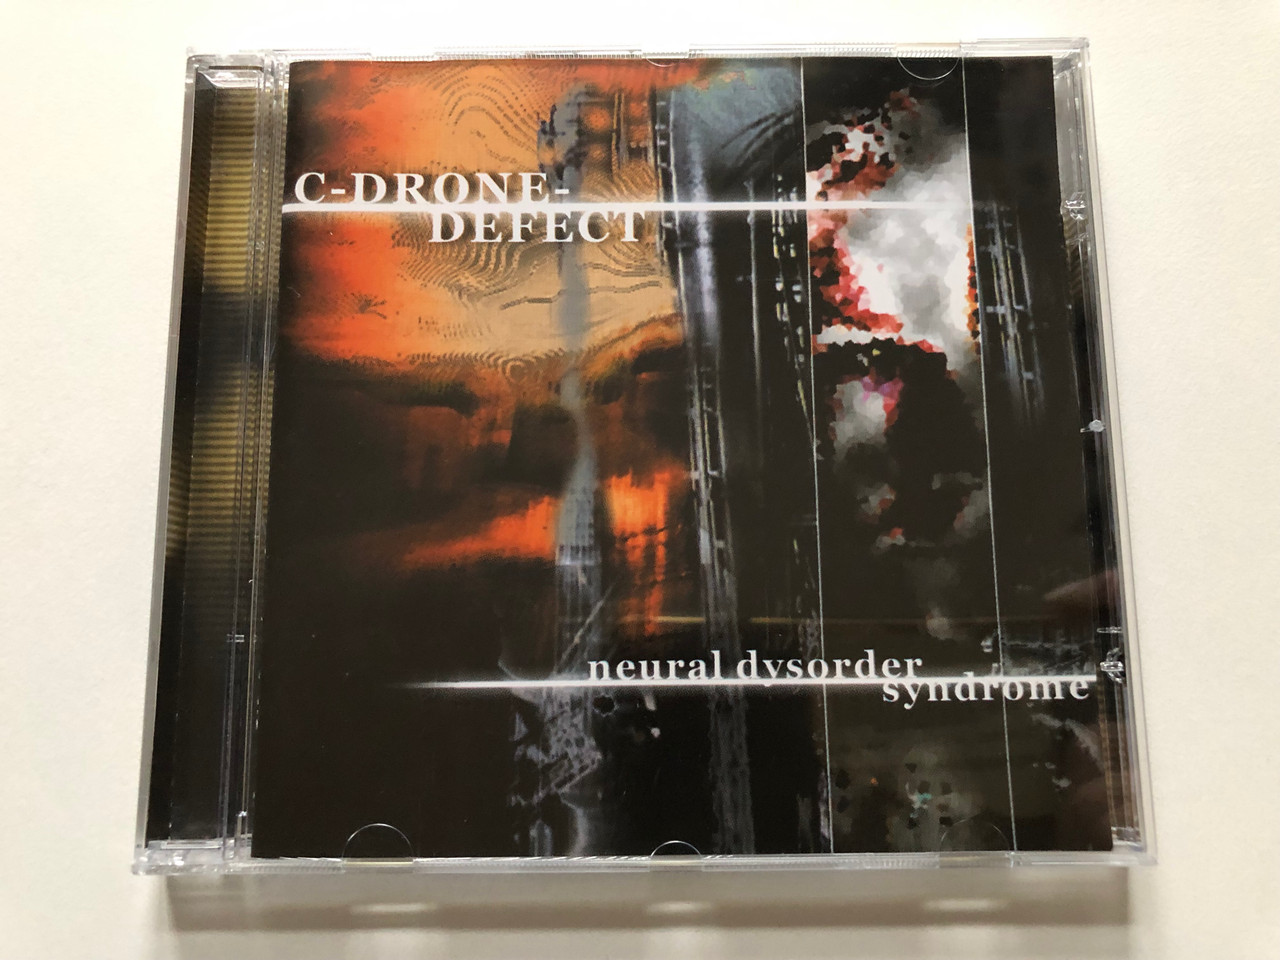 https://cdn10.bigcommerce.com/s-62bdpkt7pb/products/0/images/312842/C-Drone-Defect_Neural_Dysorder_Syndrome_Synthetic_Symphony_Audio_CD_2001_SPV_085-62502_CD_1__21896.1700200654.1280.1280.JPG?c=2